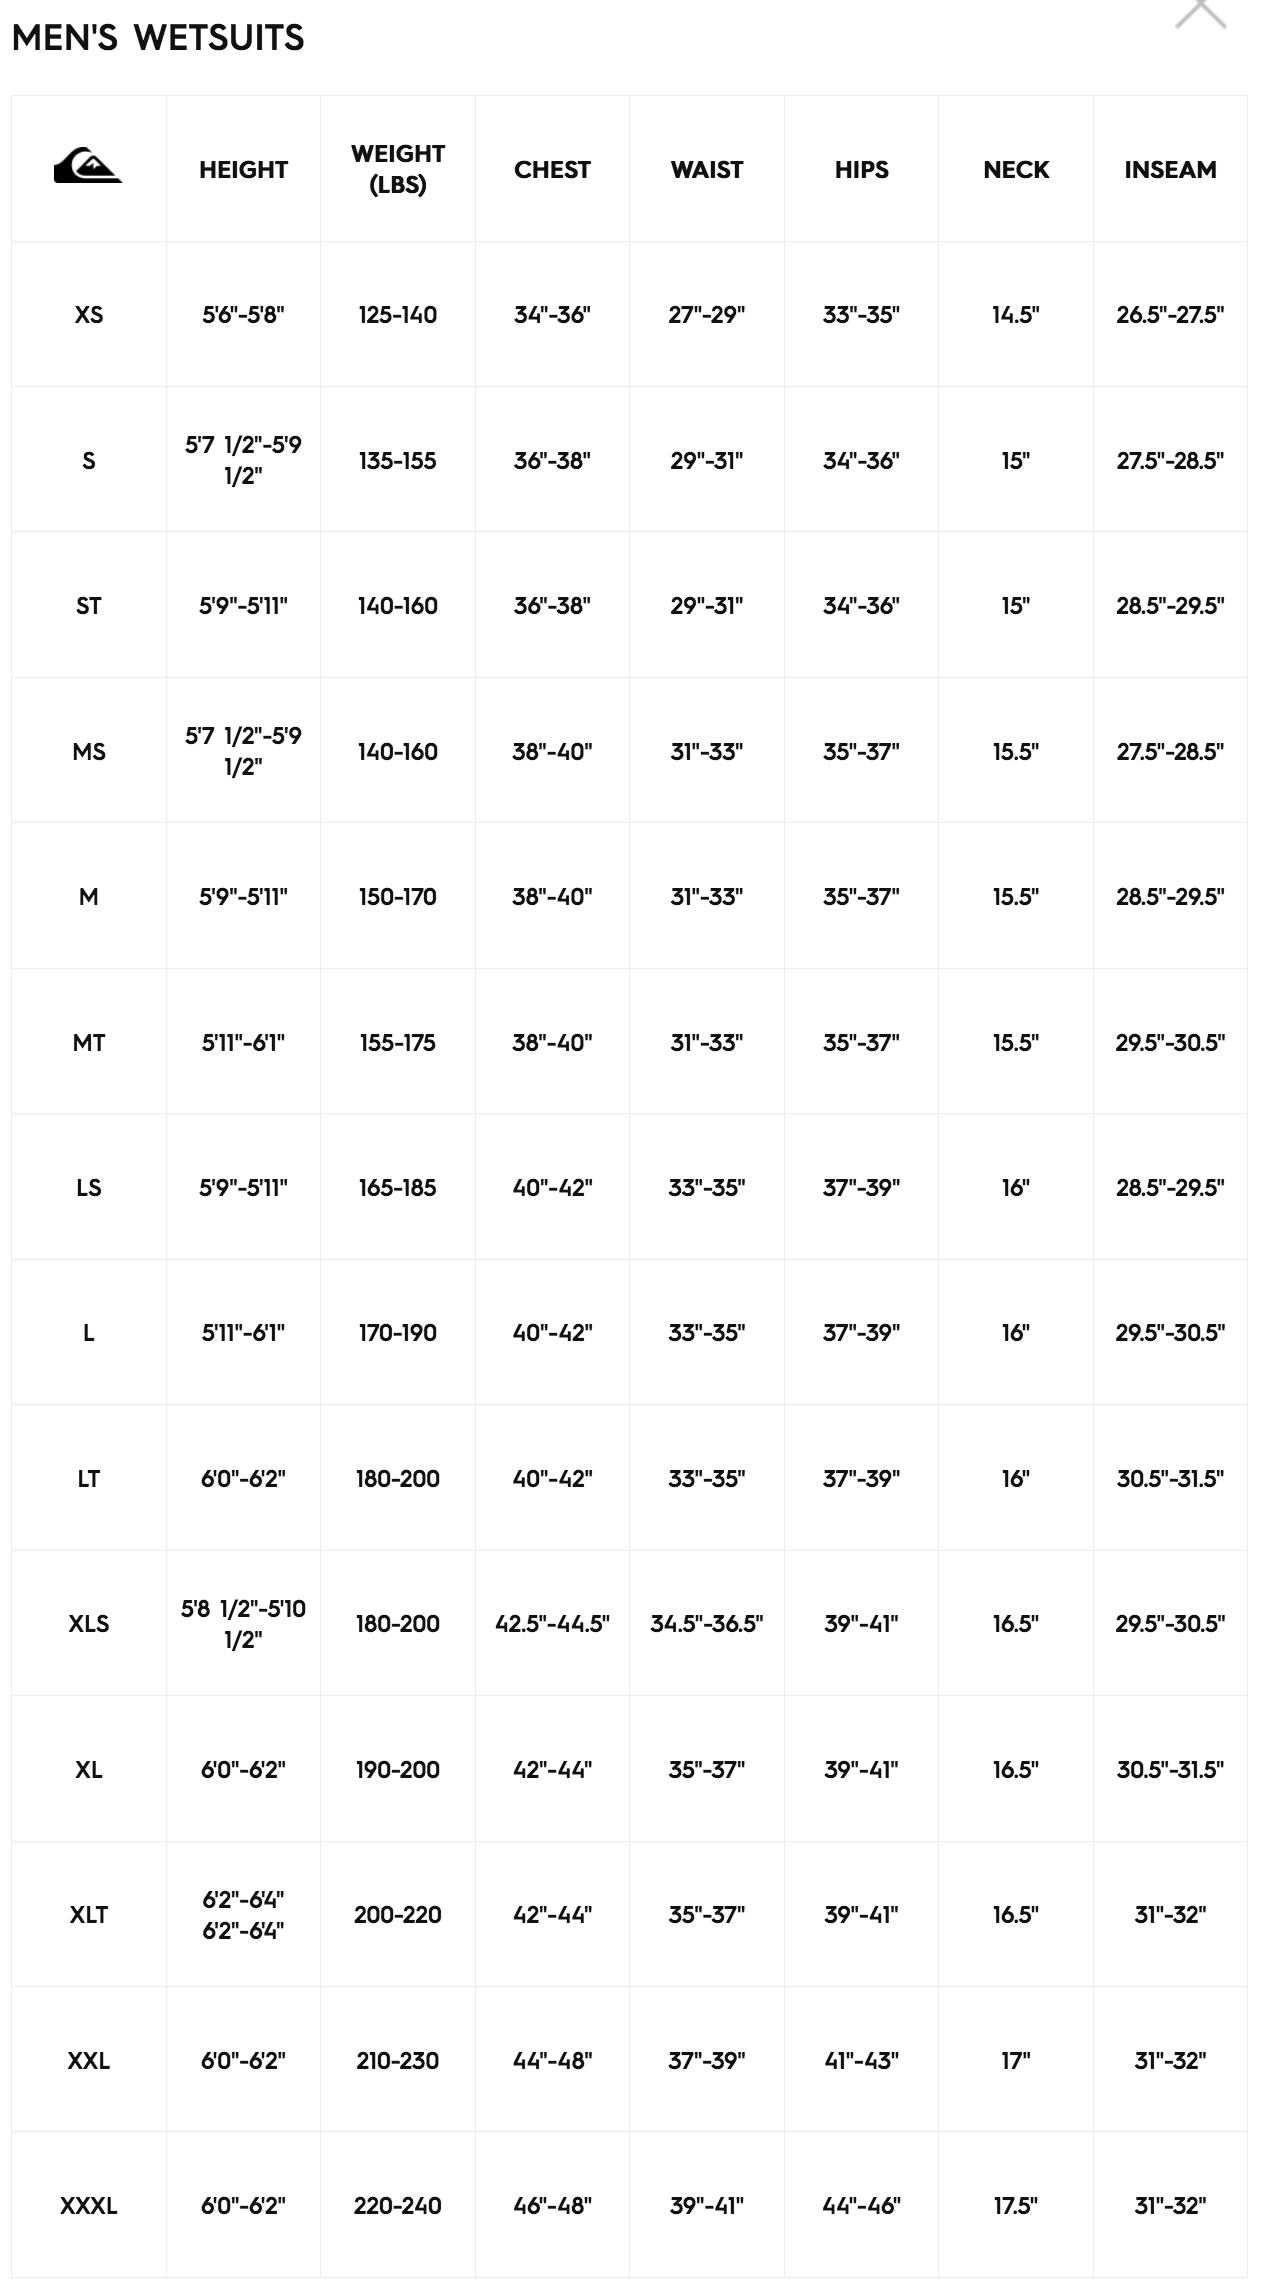 Quiksilver Youth Wetsuit Size Chart